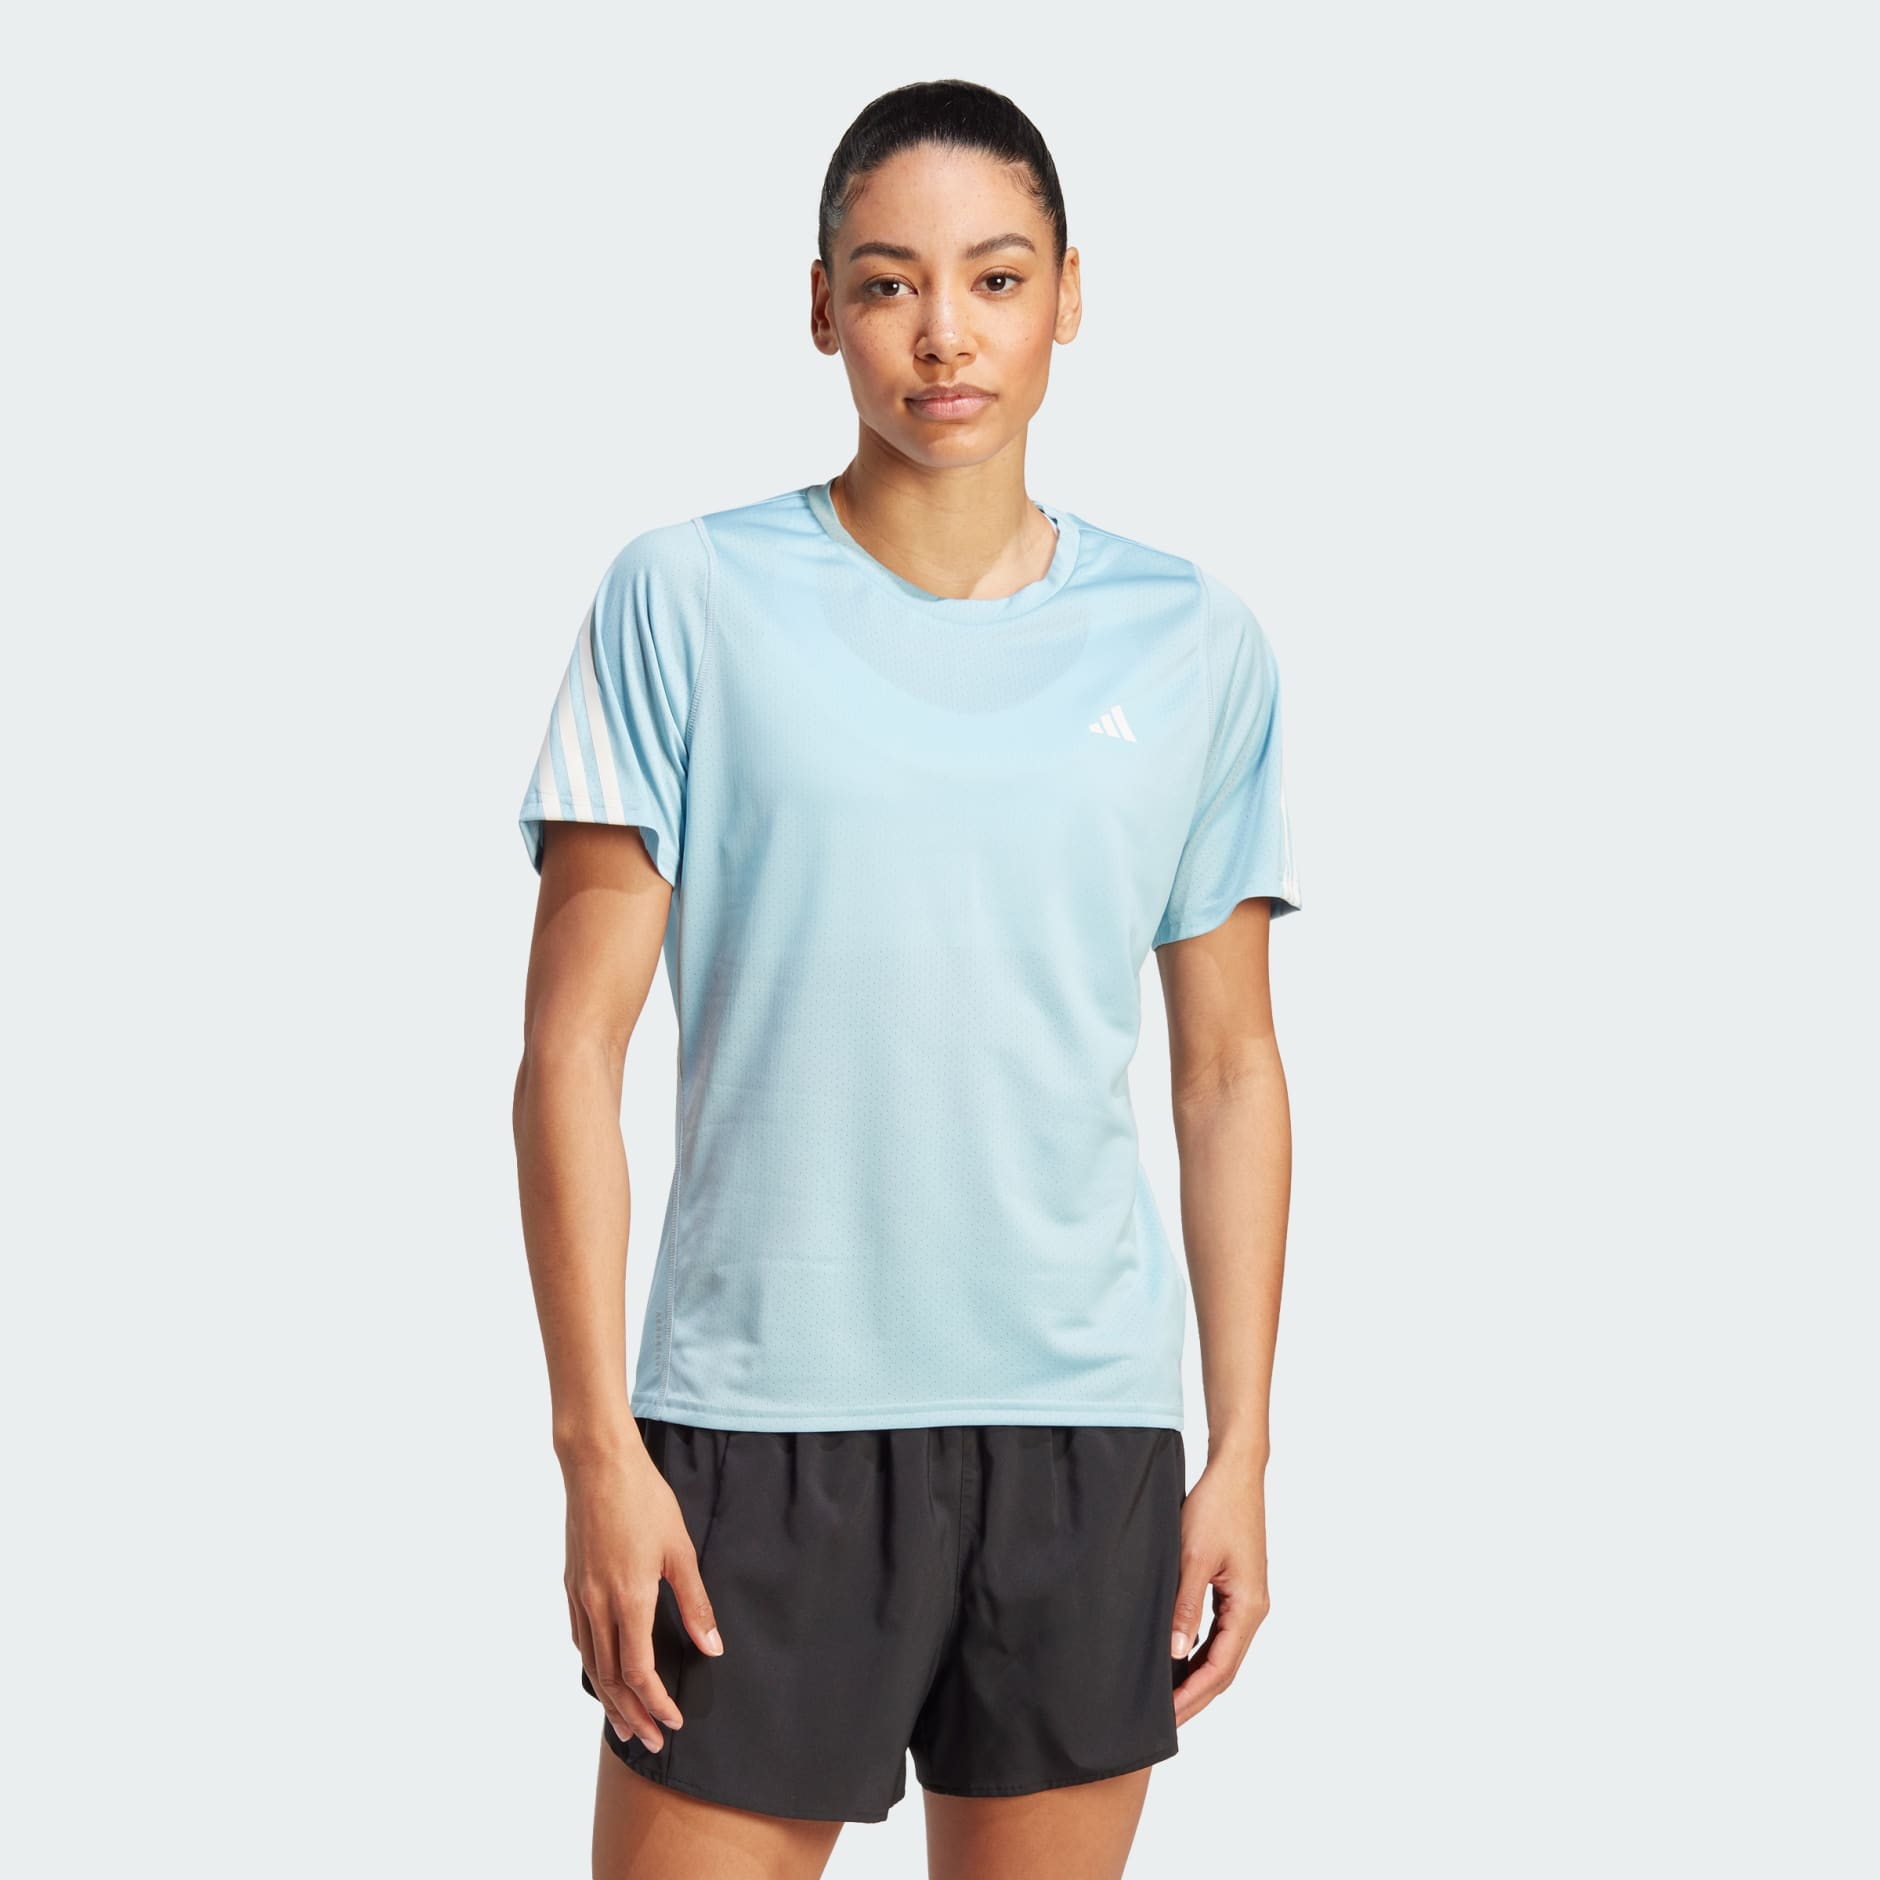 Women's Clothing - Run Icons 3-Stripes Low-Carbon Running Tee - Blue ...